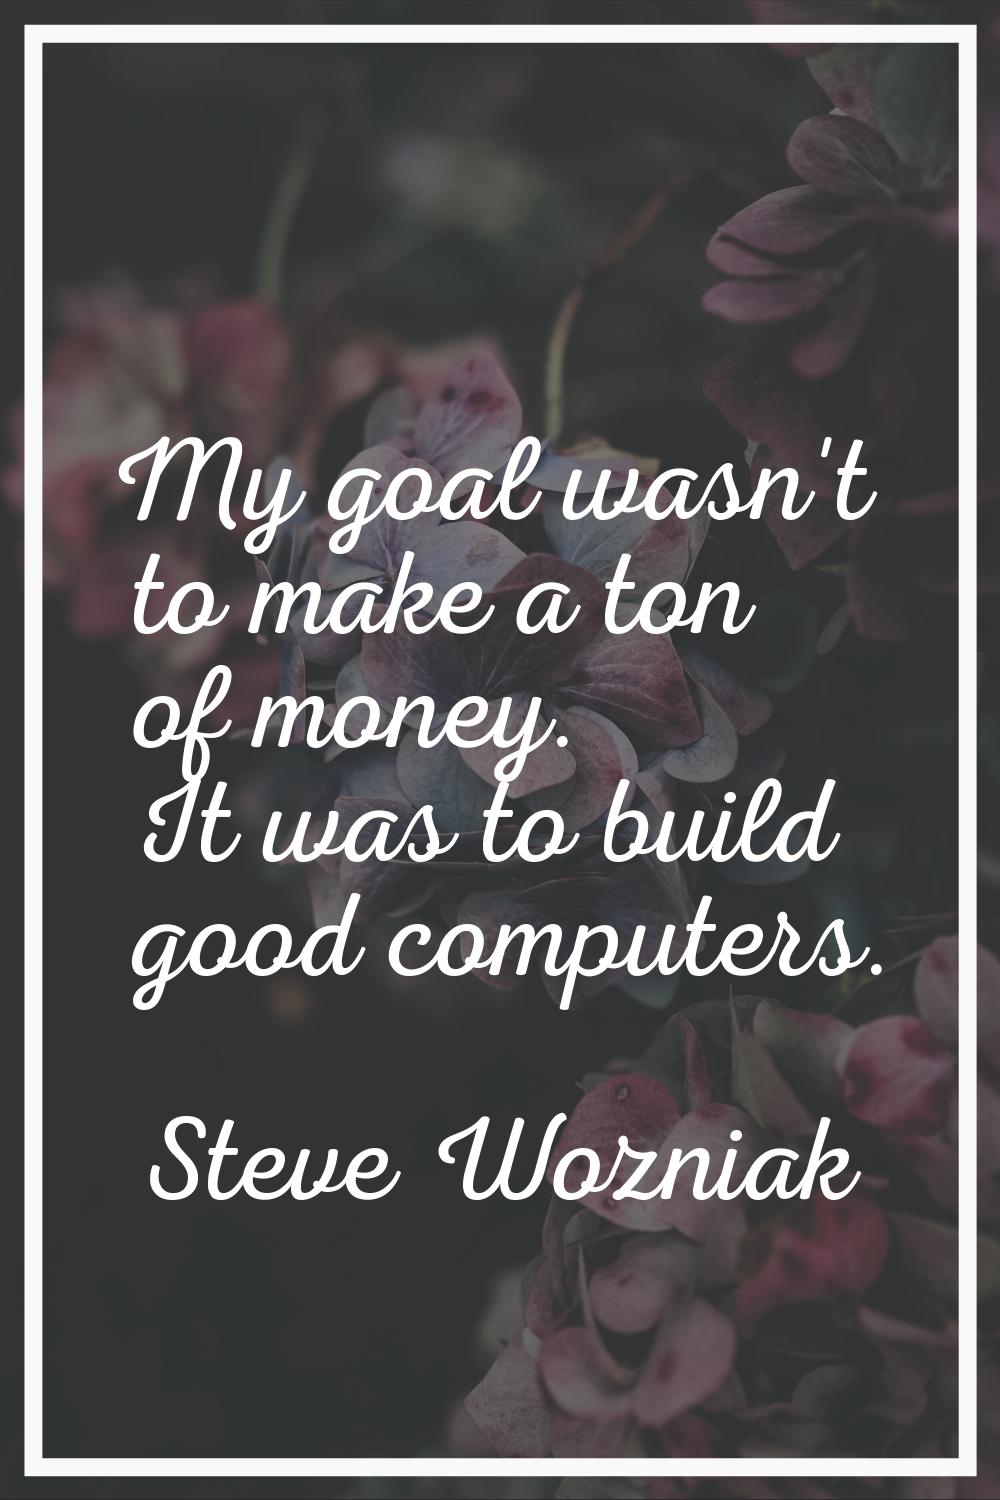 My goal wasn't to make a ton of money. It was to build good computers.